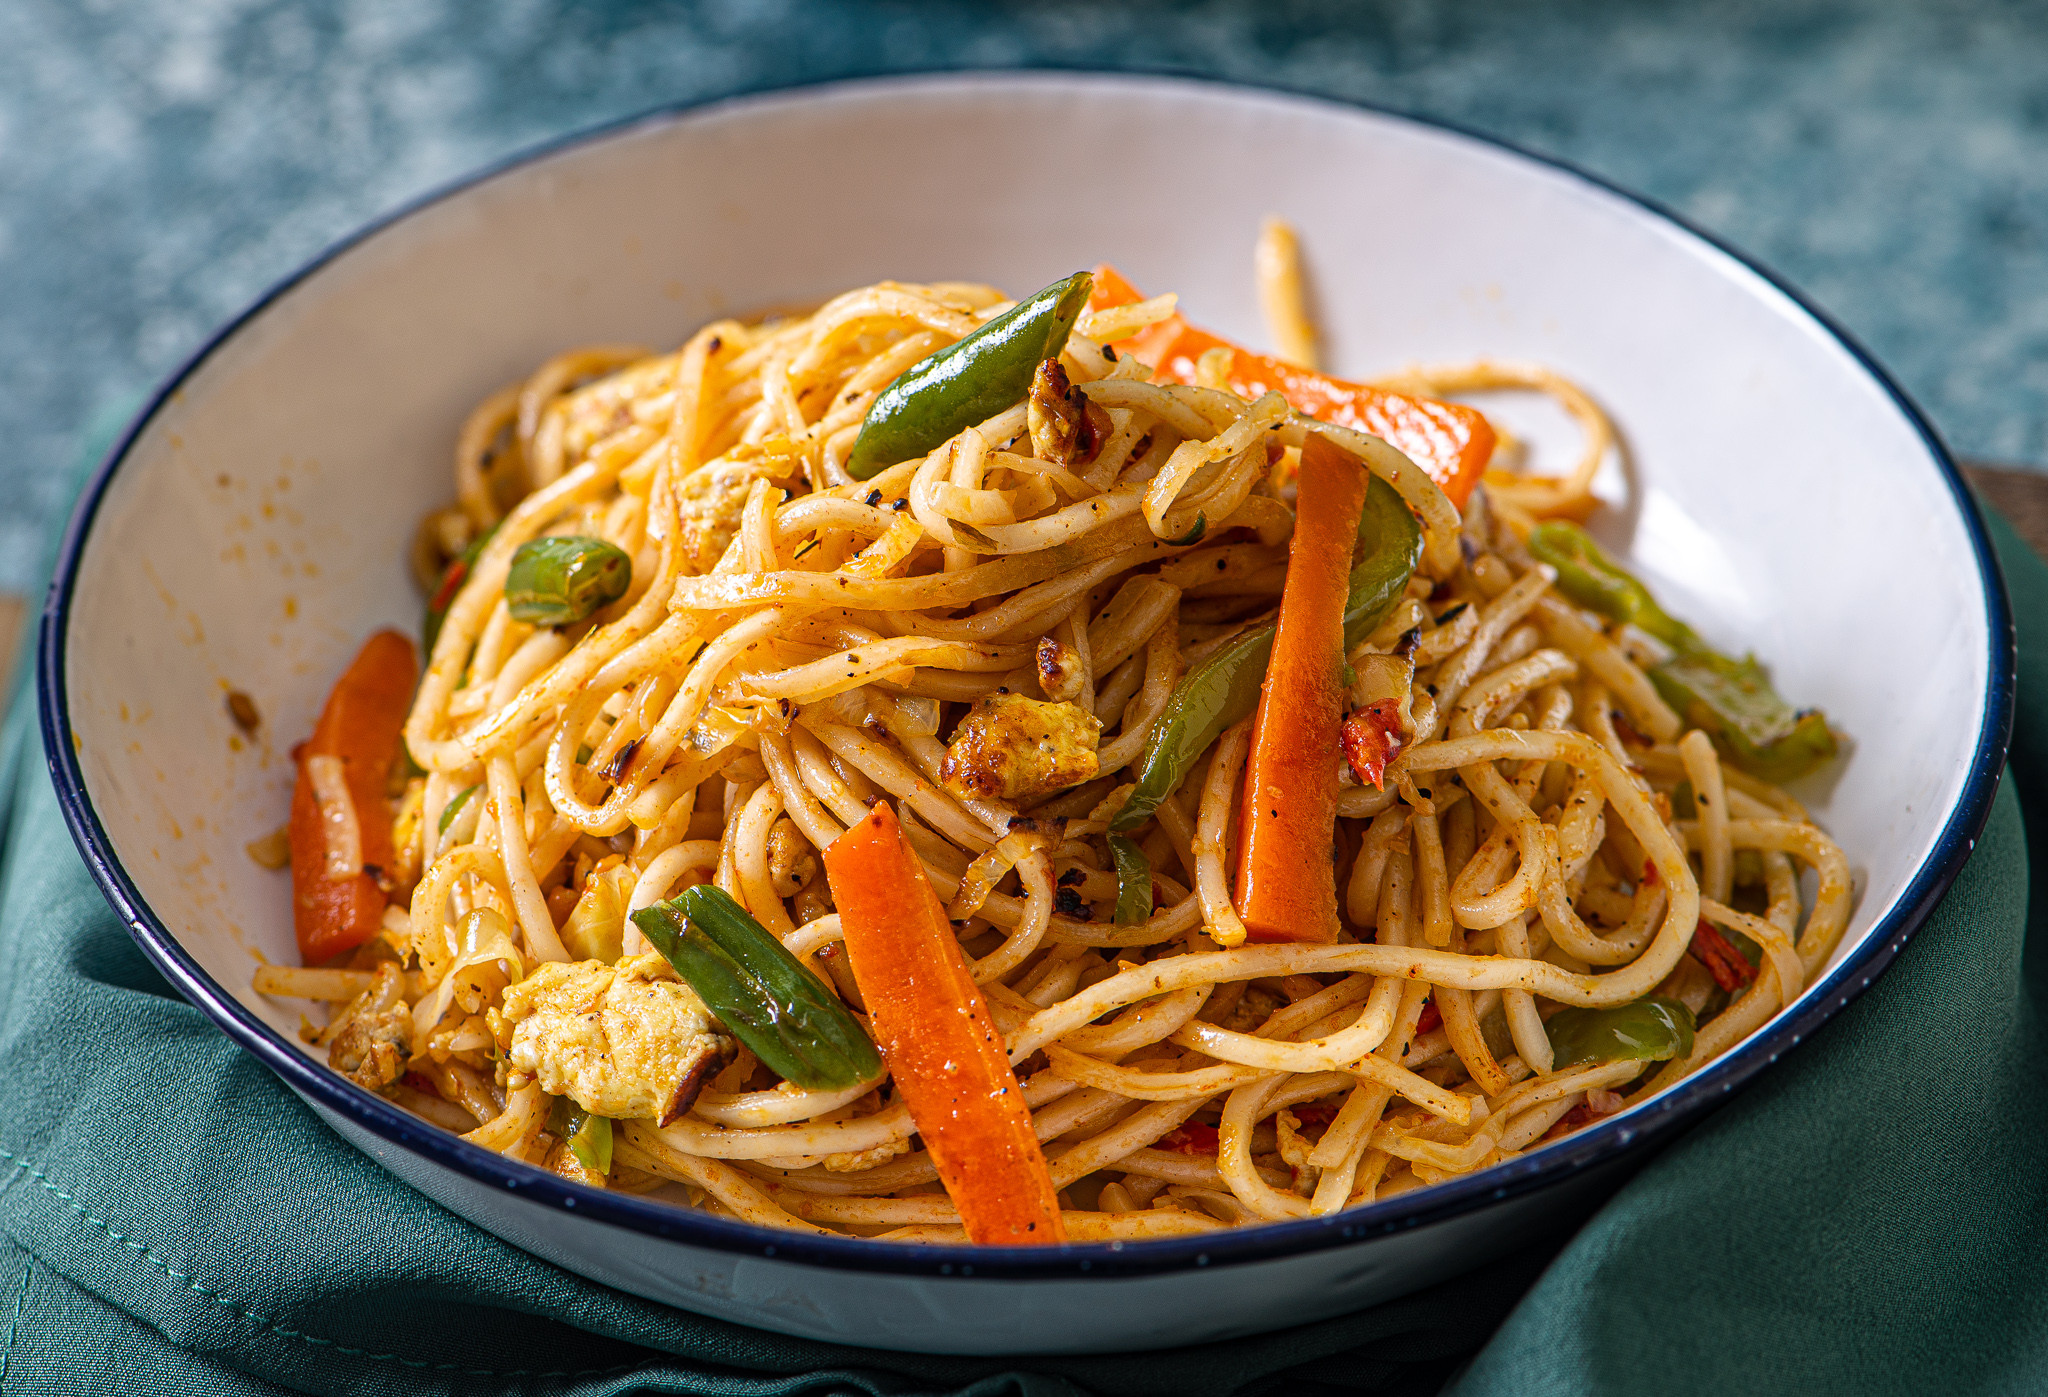 The Most Satisfying Noodles Made From Vegetables